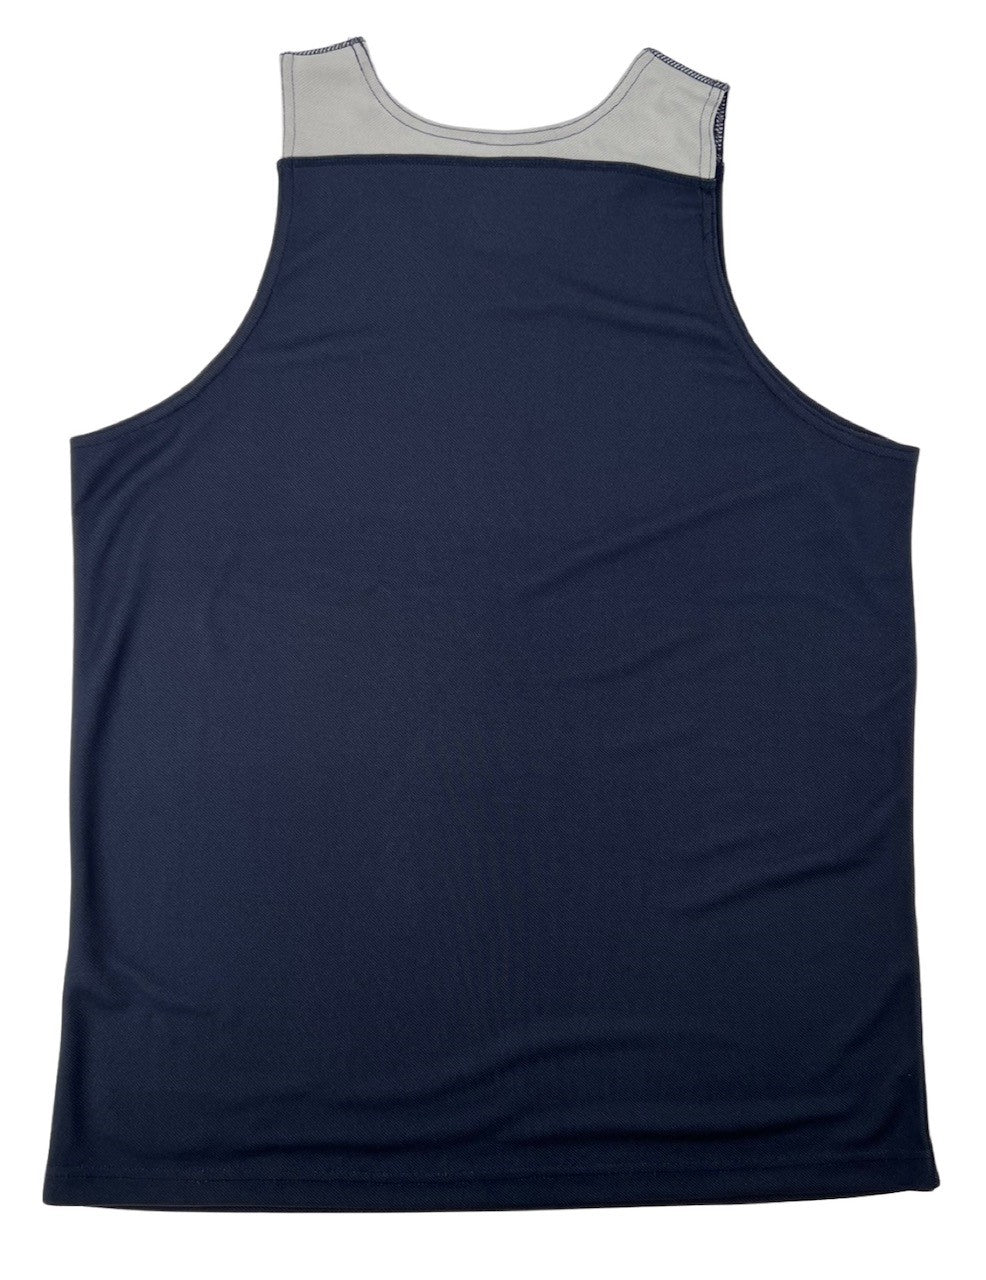 Shirts and Skins Basketball Navy Hybrid Training Jersey – Special Make-Up